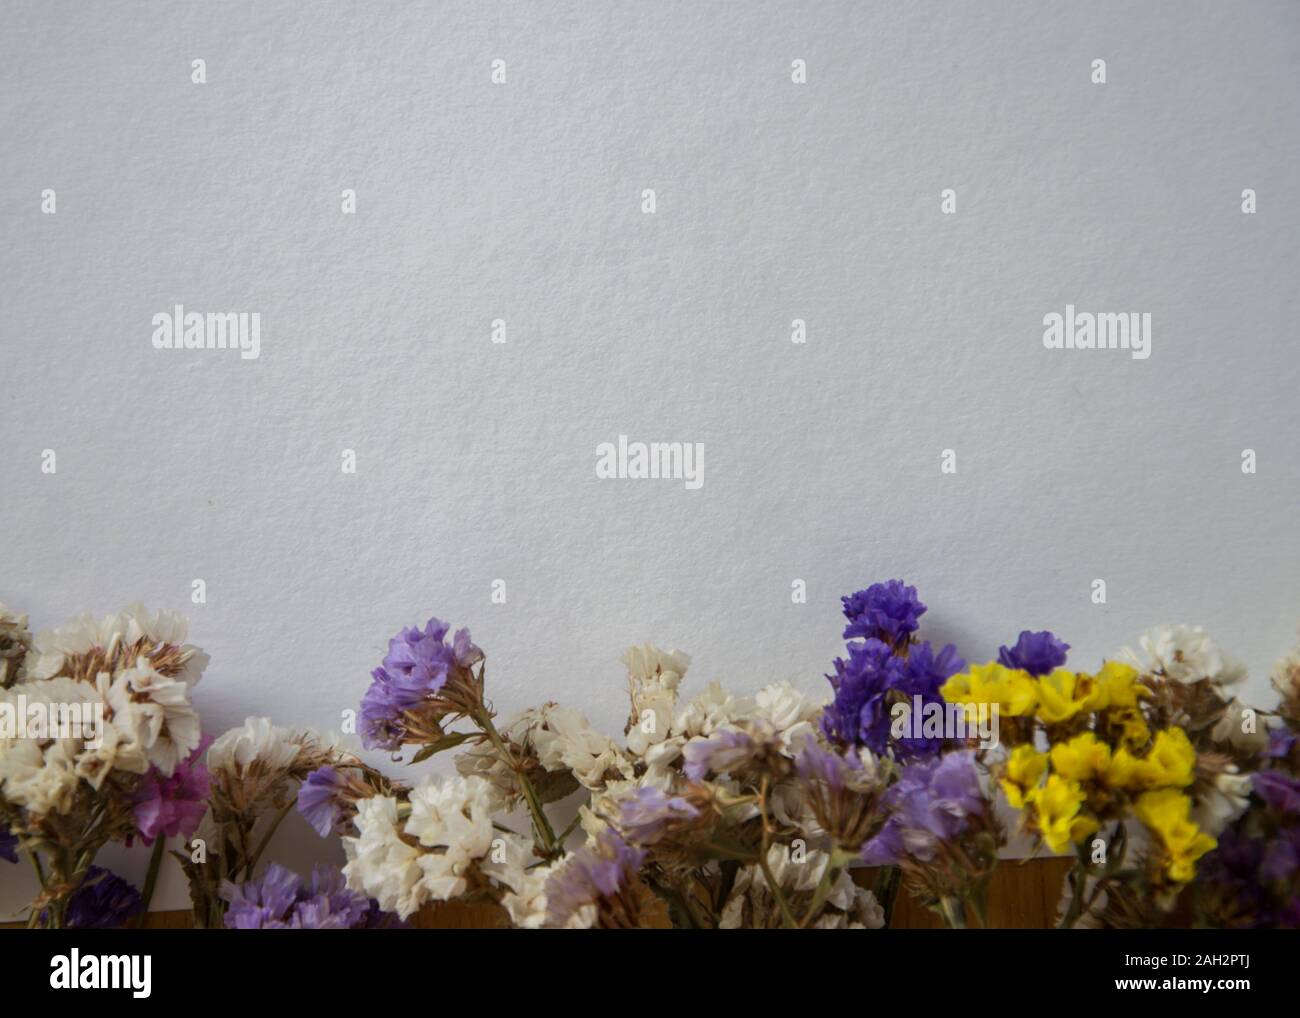 Multicolored dried flowers, colorful limonium statice plant with copy space, blank white paper with place for text Stock Photo